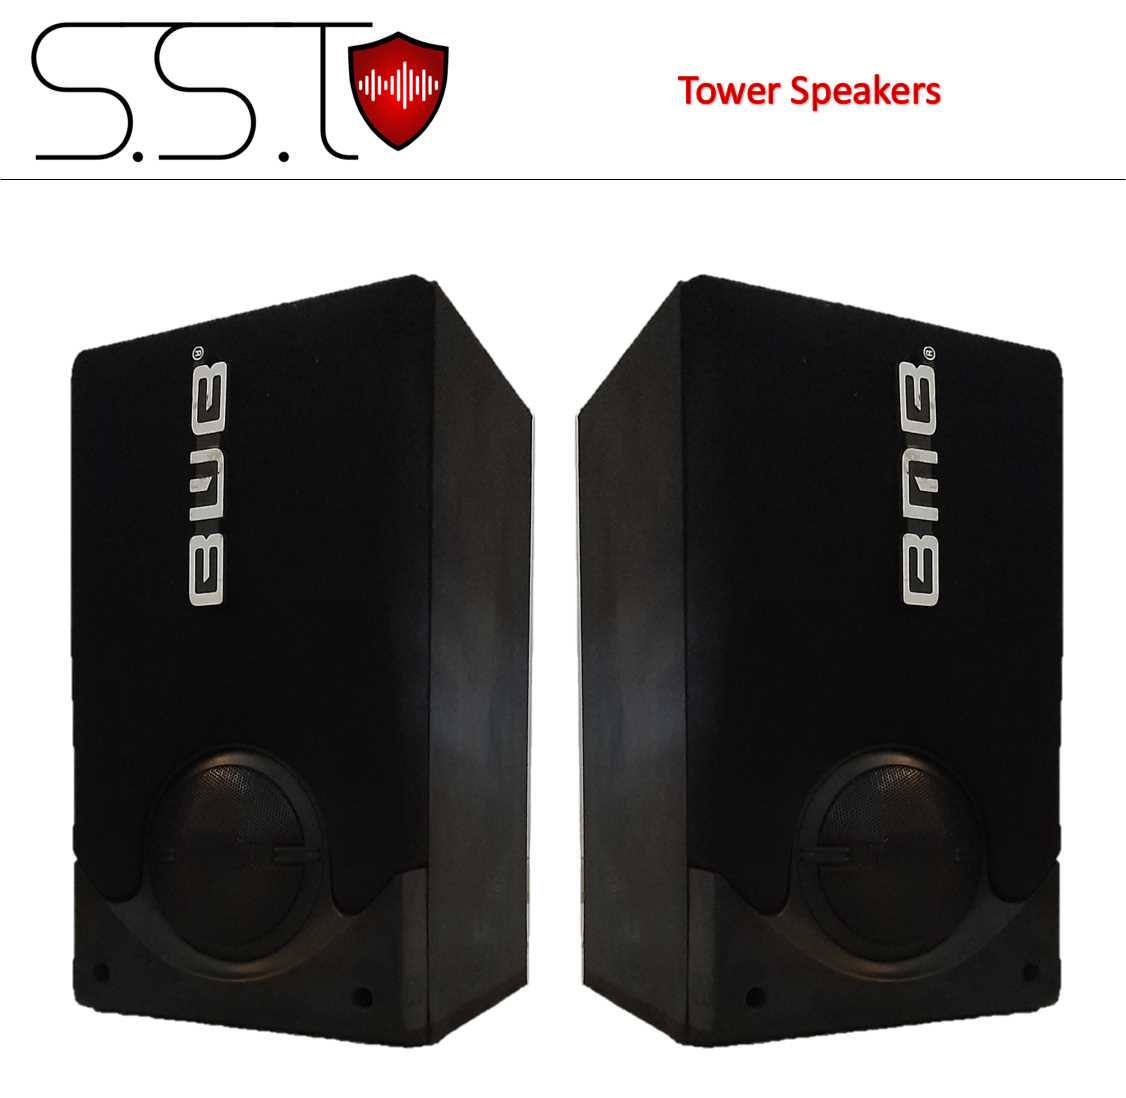 Tower Speakers for Sale sound and safety technologies